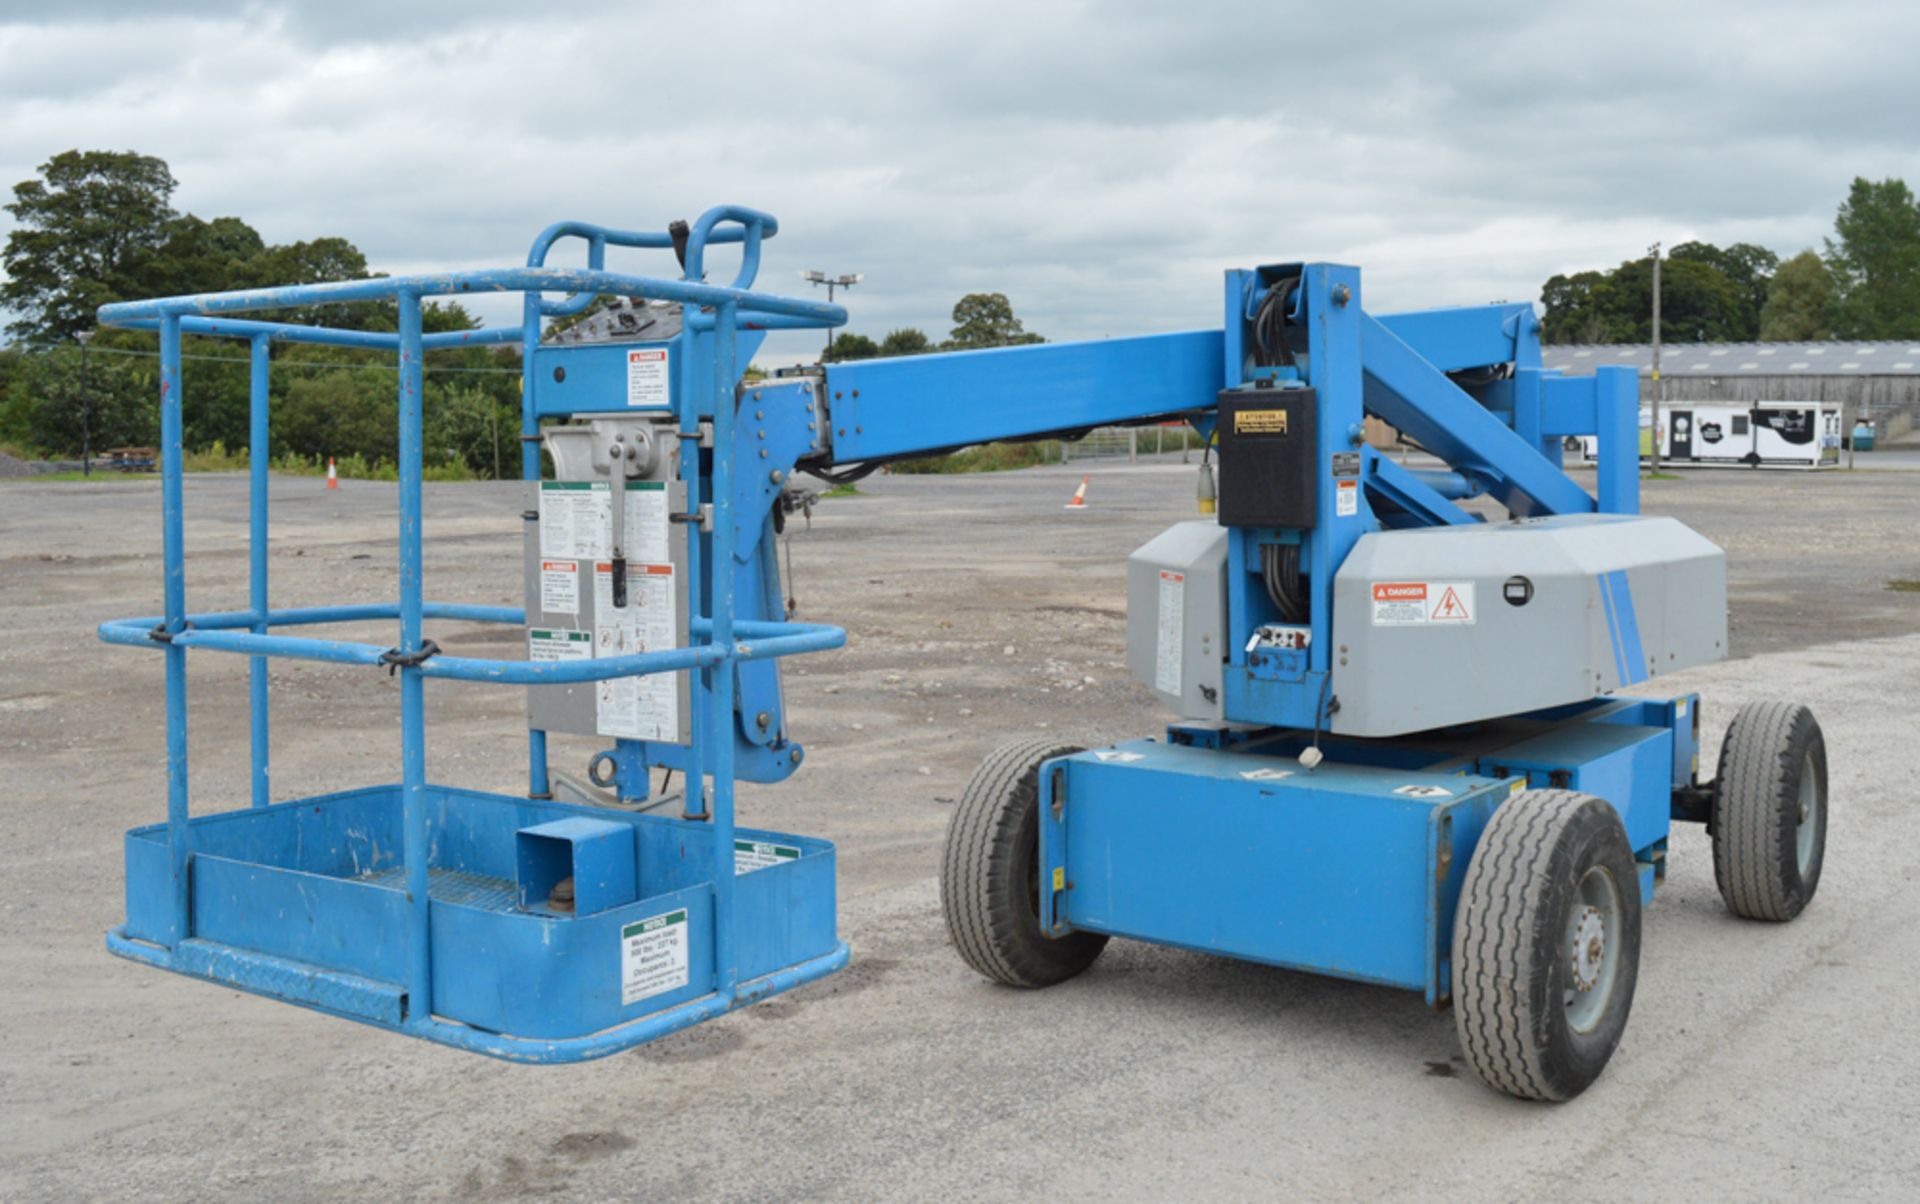 Genie Z-30/20 31 ft battery electric boom lift S/N: 23590 - Image 2 of 5